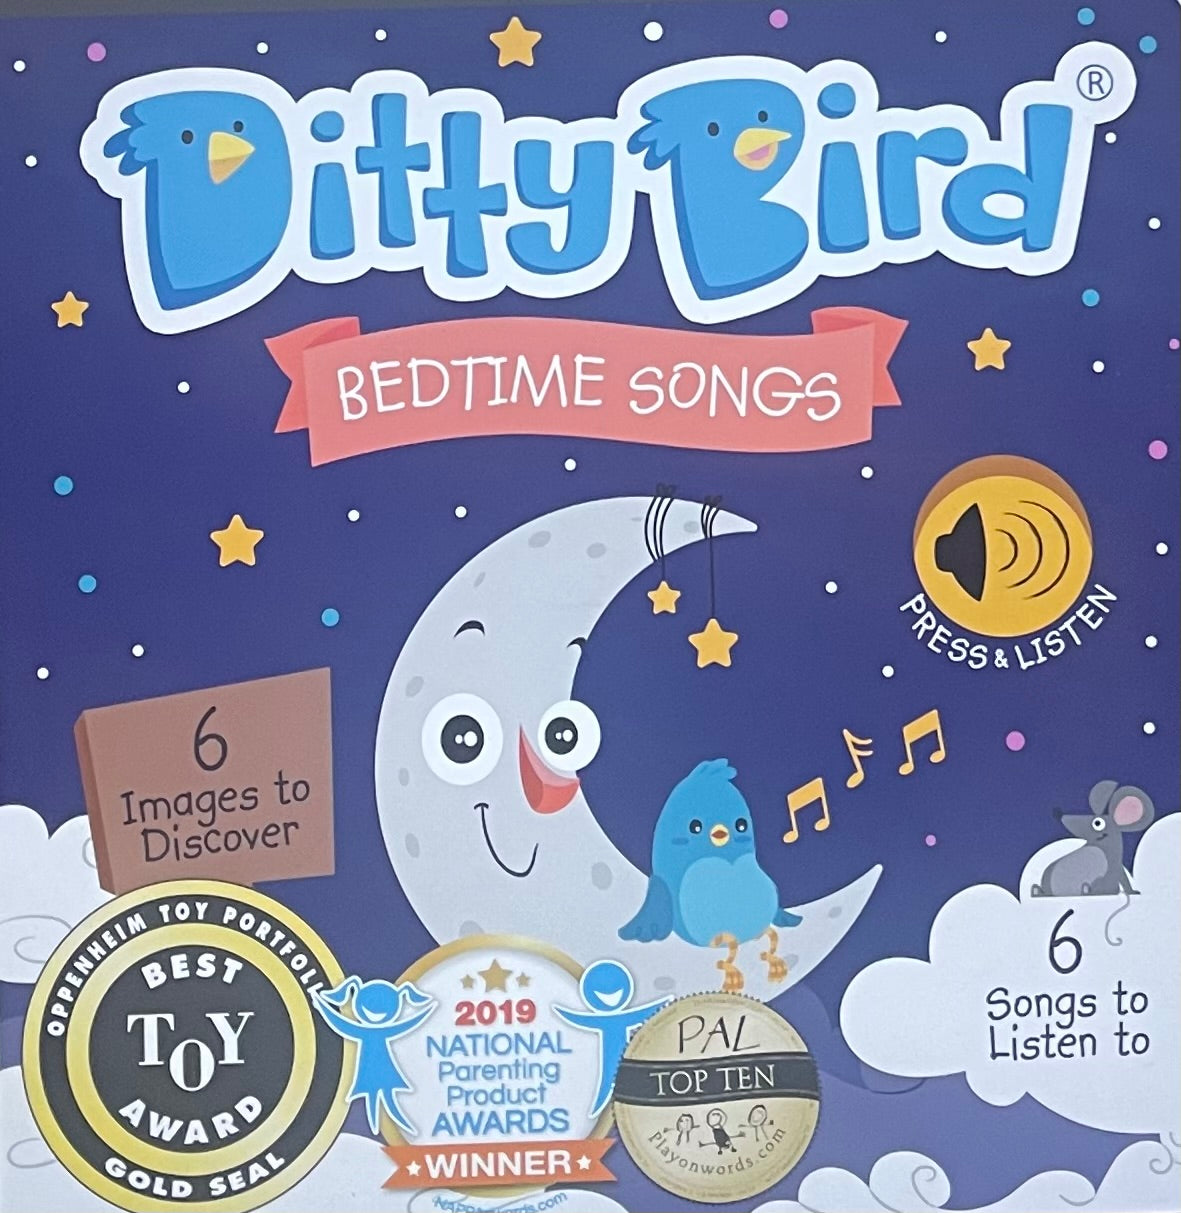 Ditty Bird Baby Sound Book: Bedtime Songs - Storytime